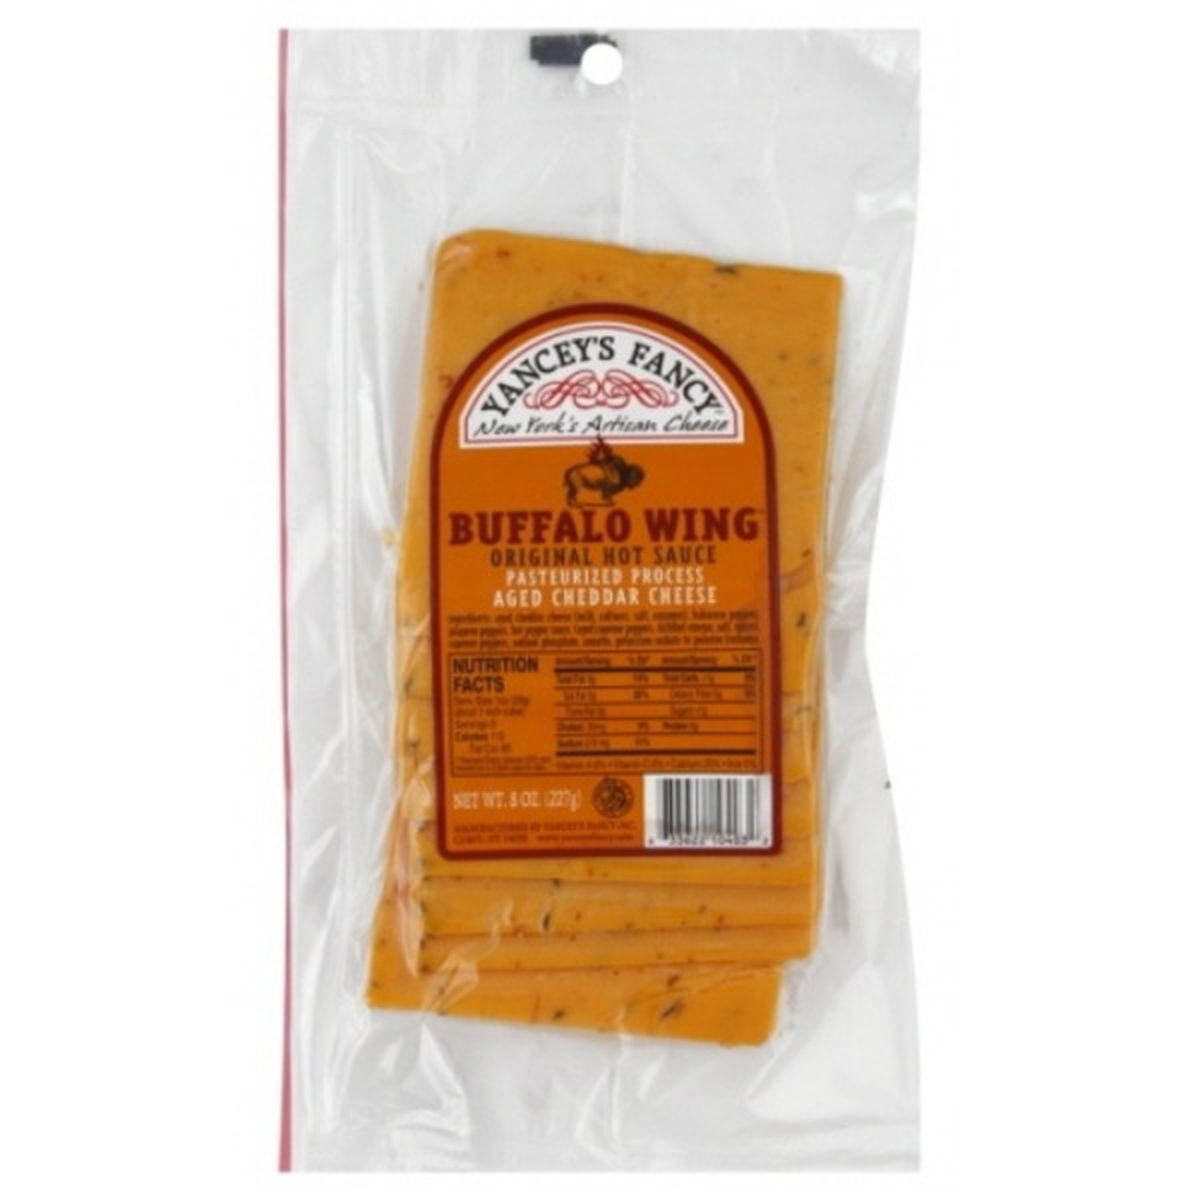 Calories in Yancey's Fancy Cheese, Pasteurized Process, Buffalo Wing, Original Hot Sauce